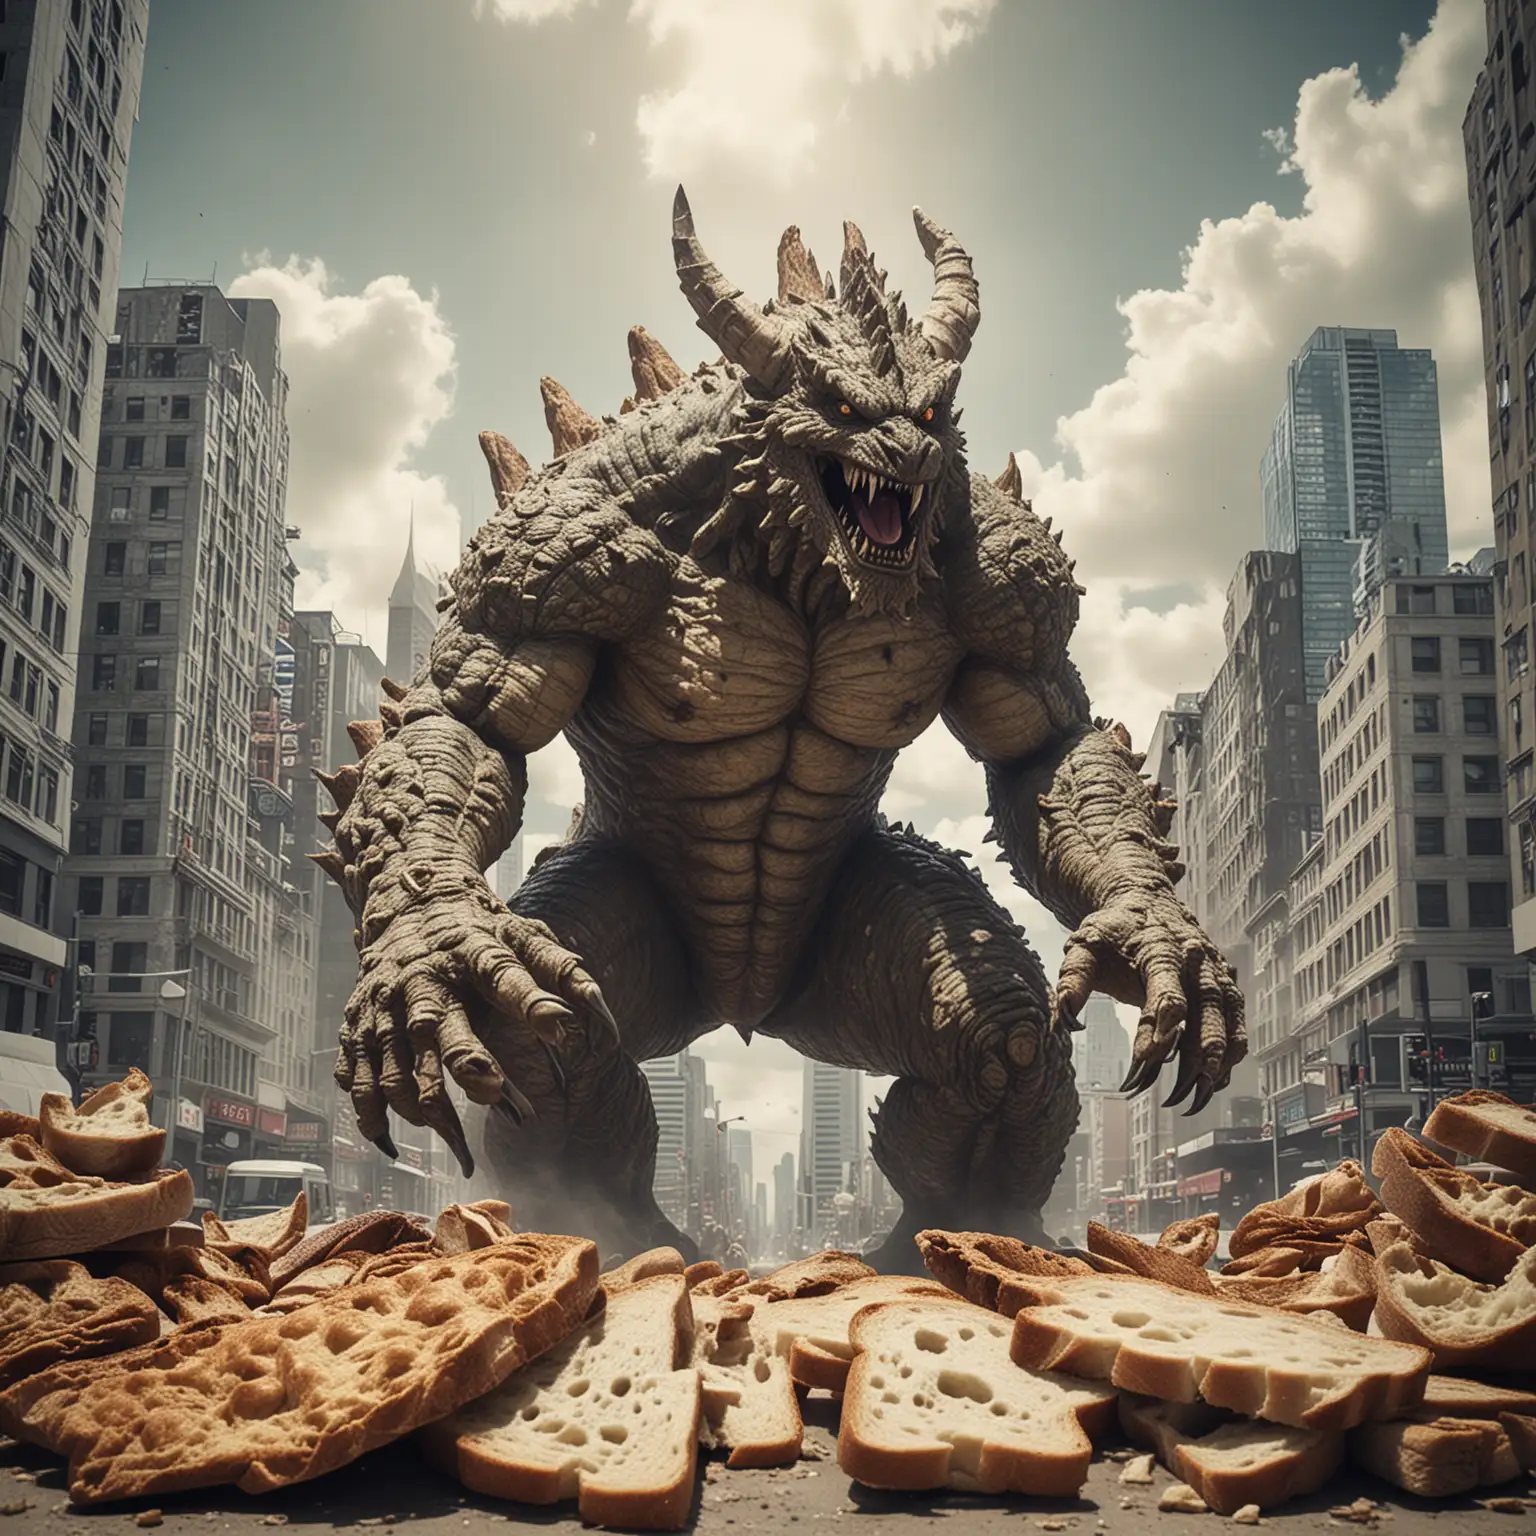 Giant Sourdough Bread Monster Rampages Cityscape